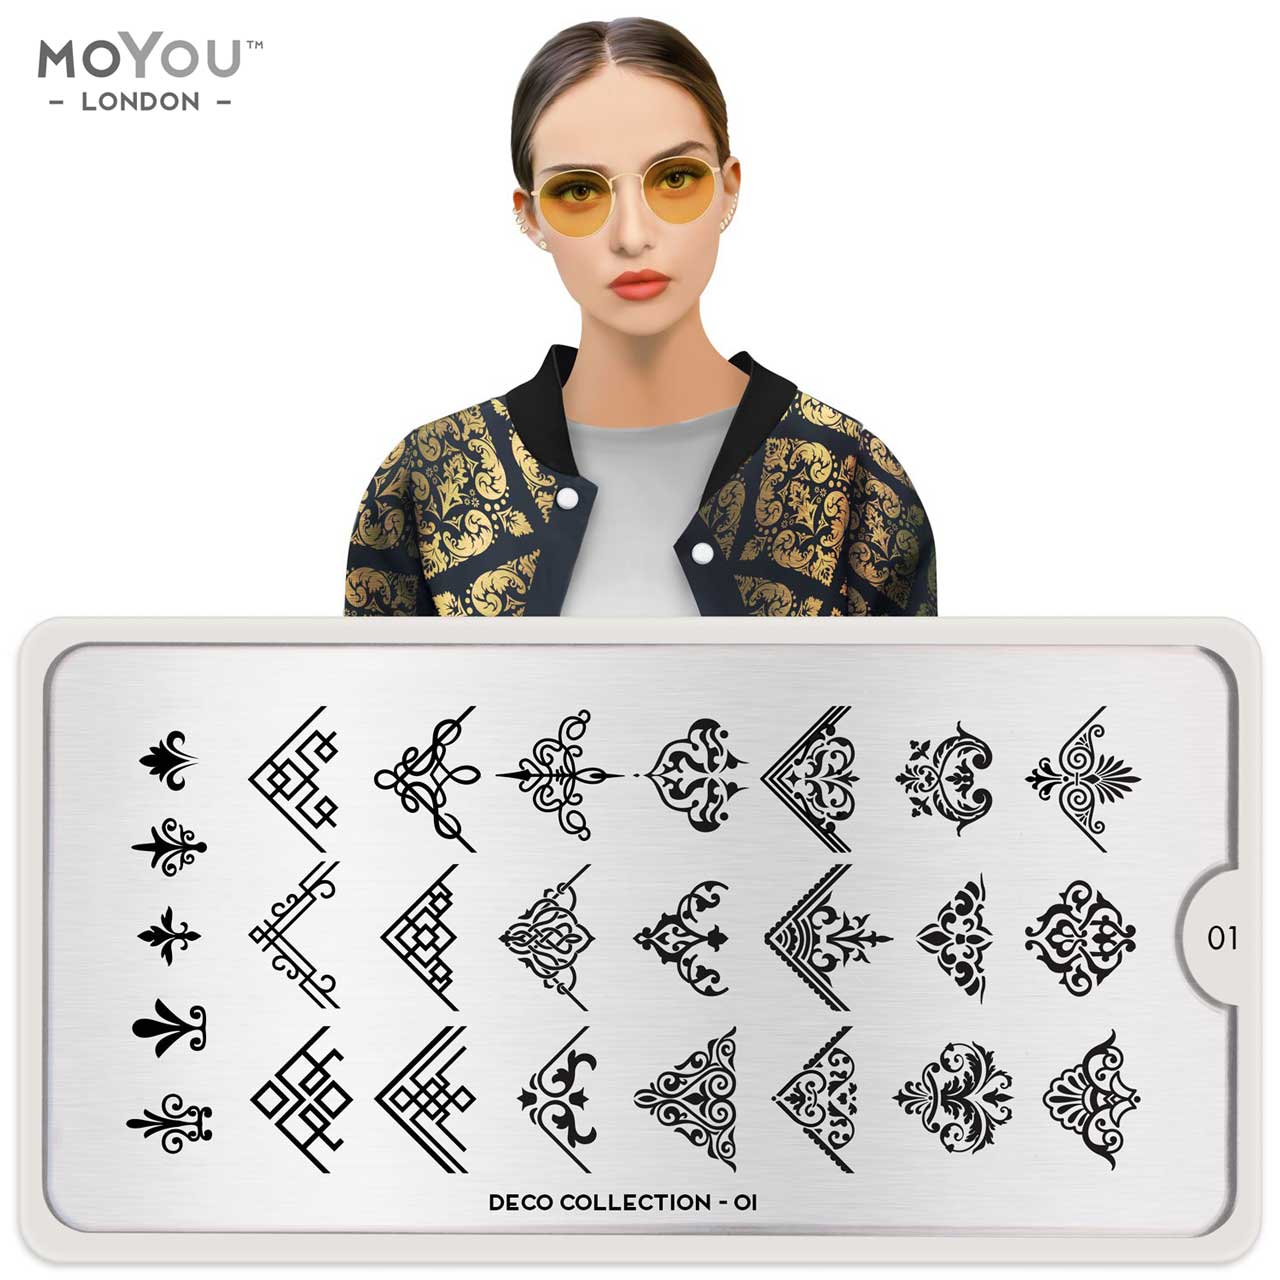 Plaque Stamping Deco 01 - MoYou London